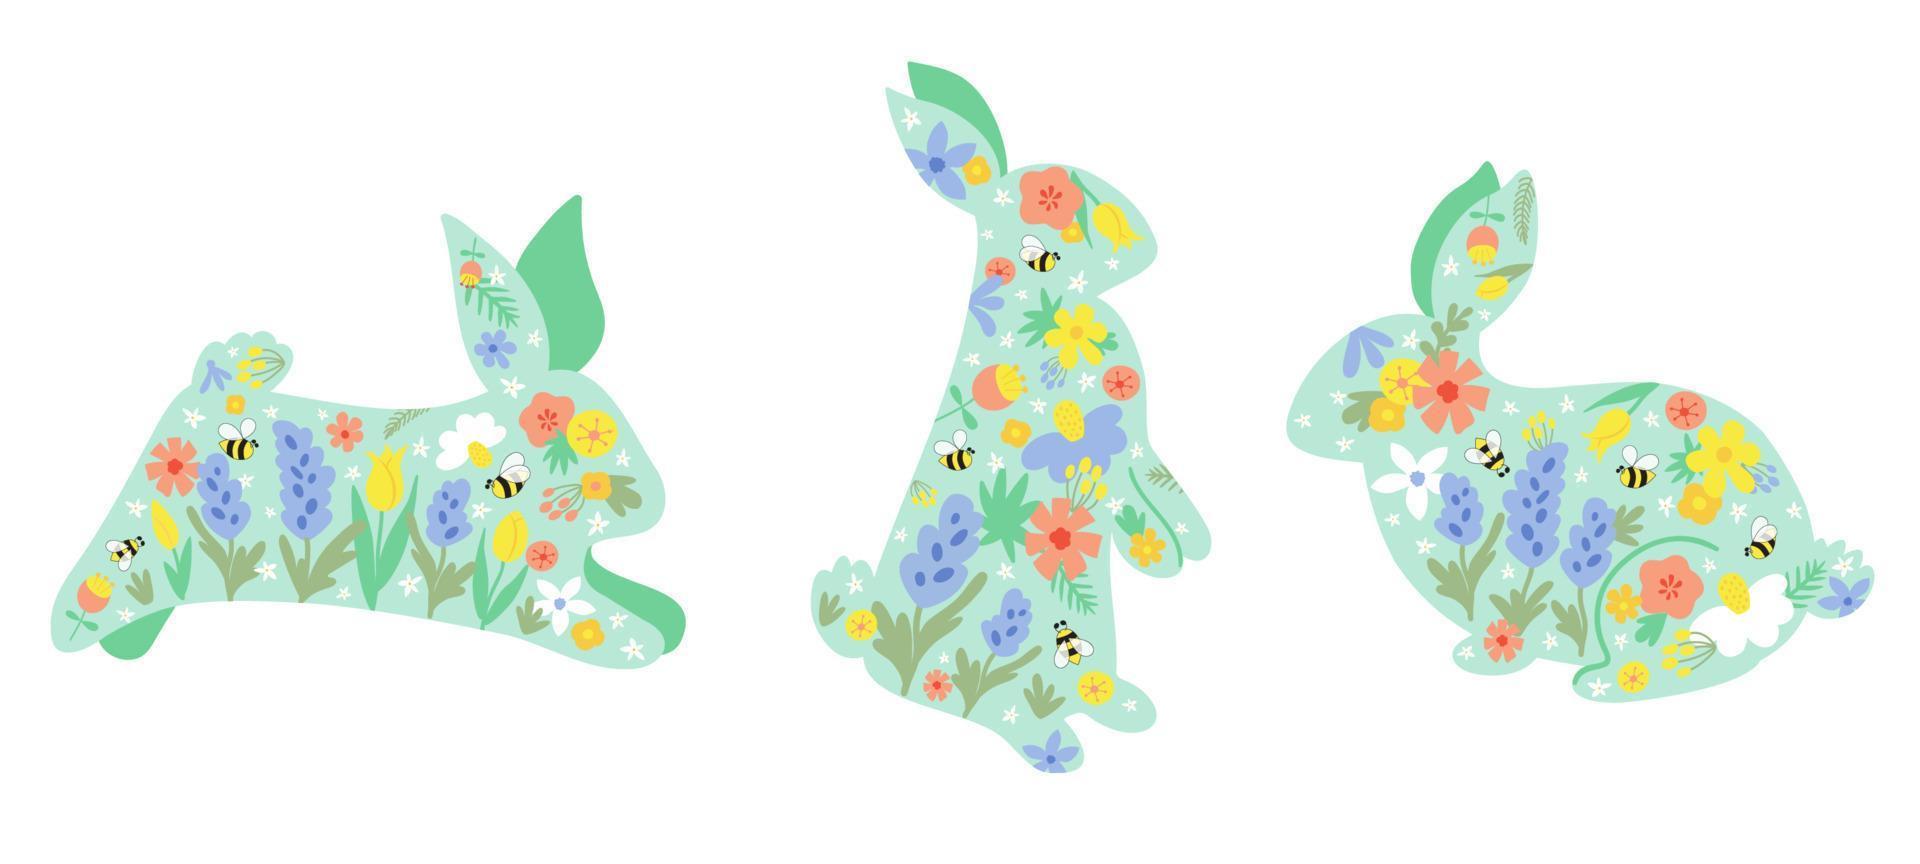 Floral Easter Bunny set. Floral rabbit collection. Spring rabbit Happy Easter rabbit vector illustration isolated graphic elements. Hand drawn flowers, cute bunny. Happy Easter decorative clipart.